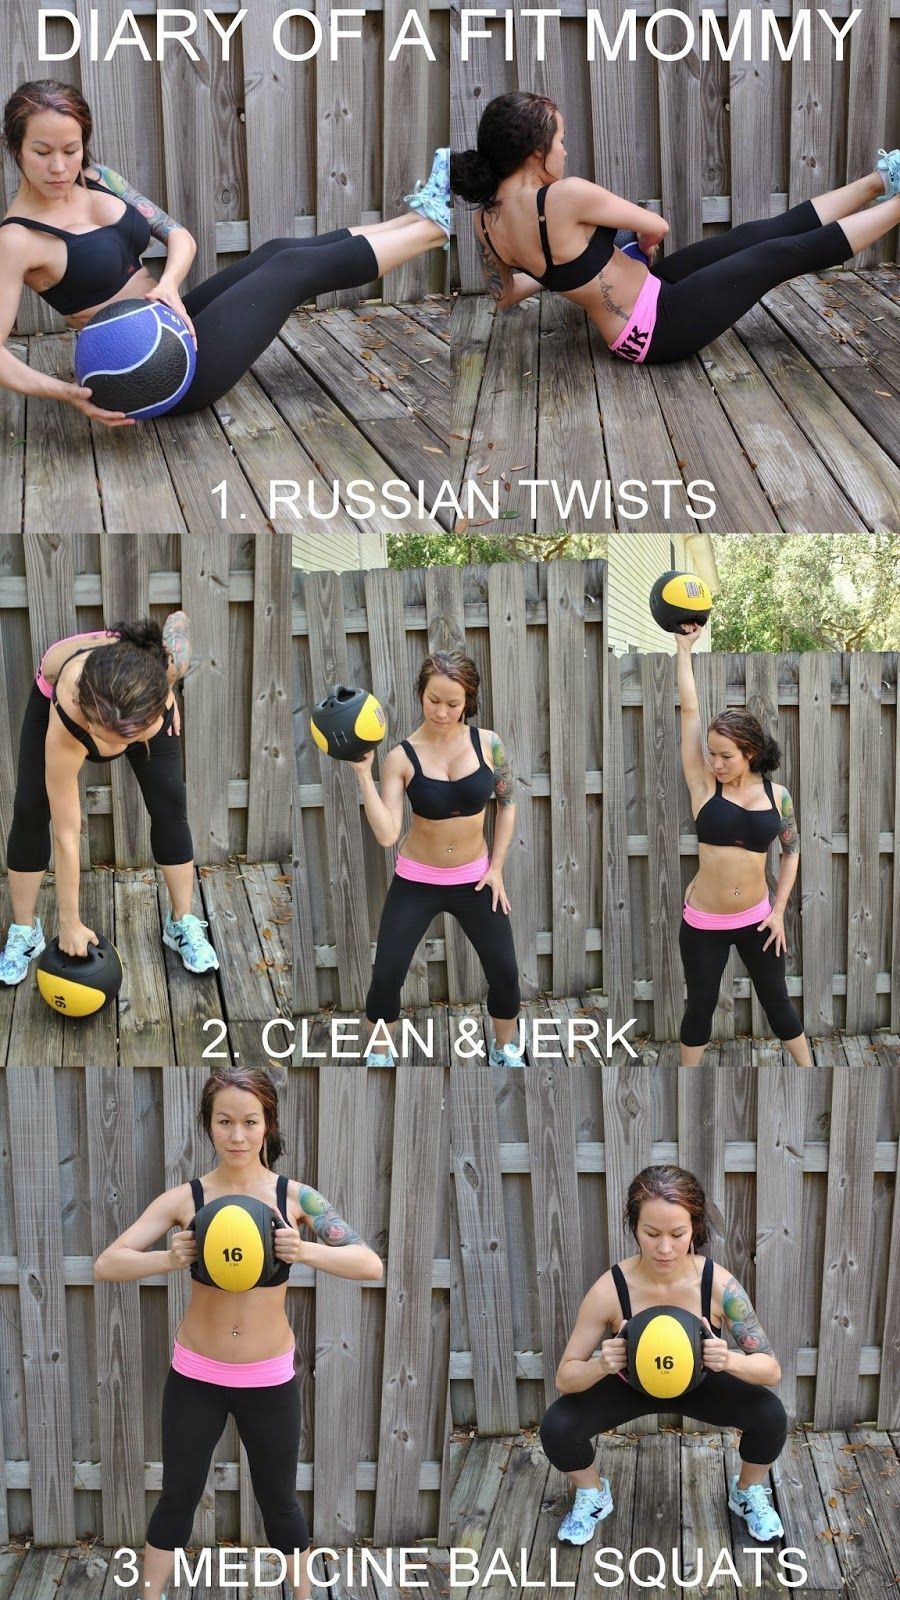 5 Minute Medicine Ball Workout – Diary of a Fit Mommy